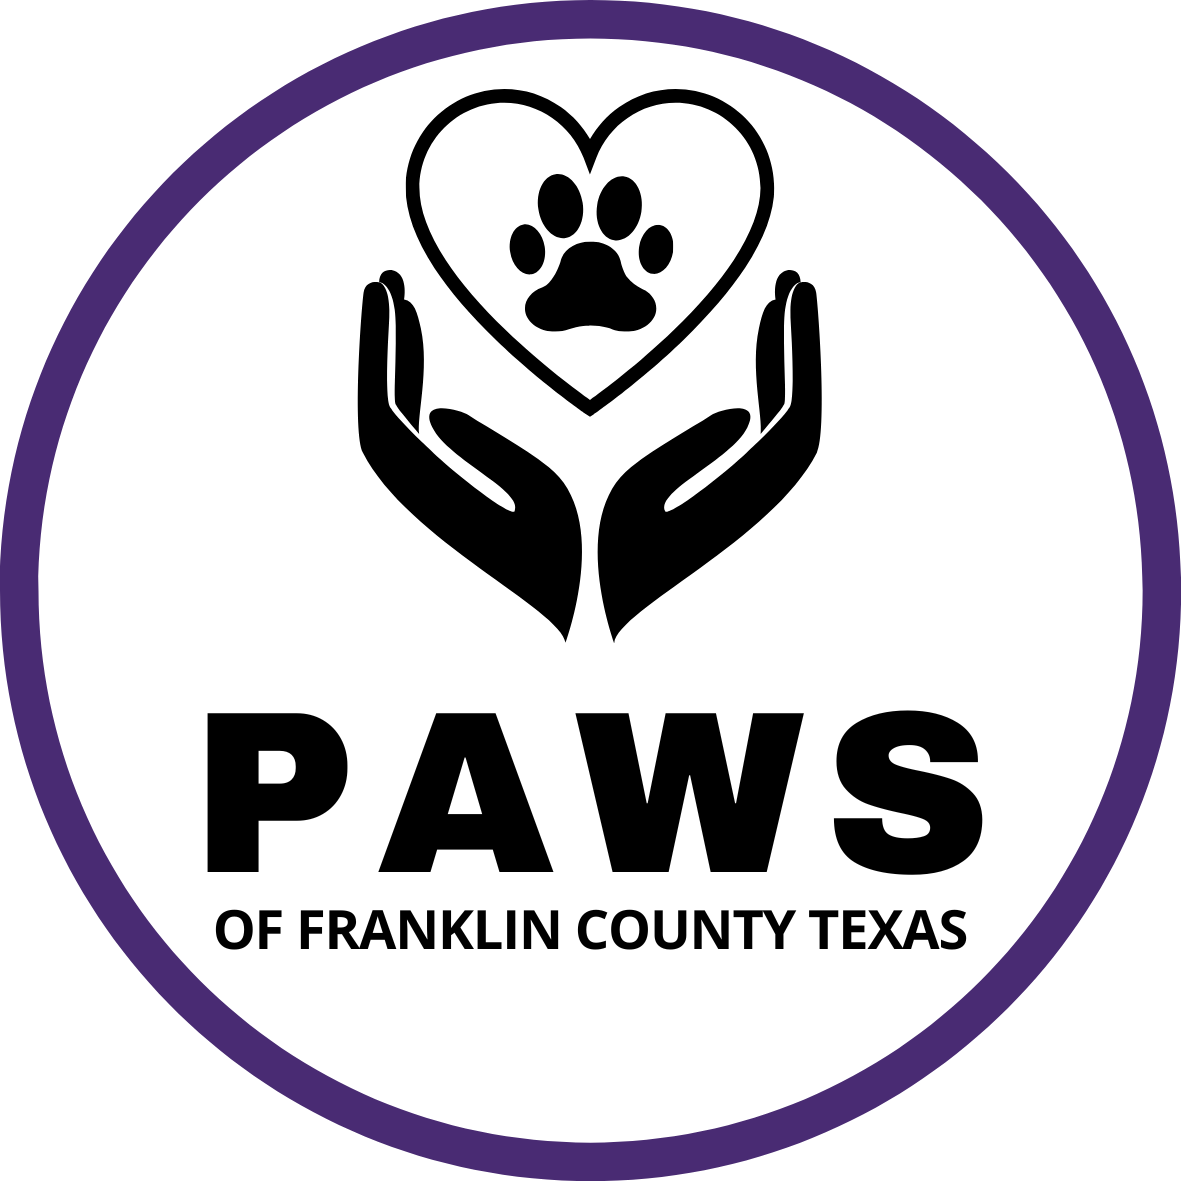 PAWS of Franklin County Texas